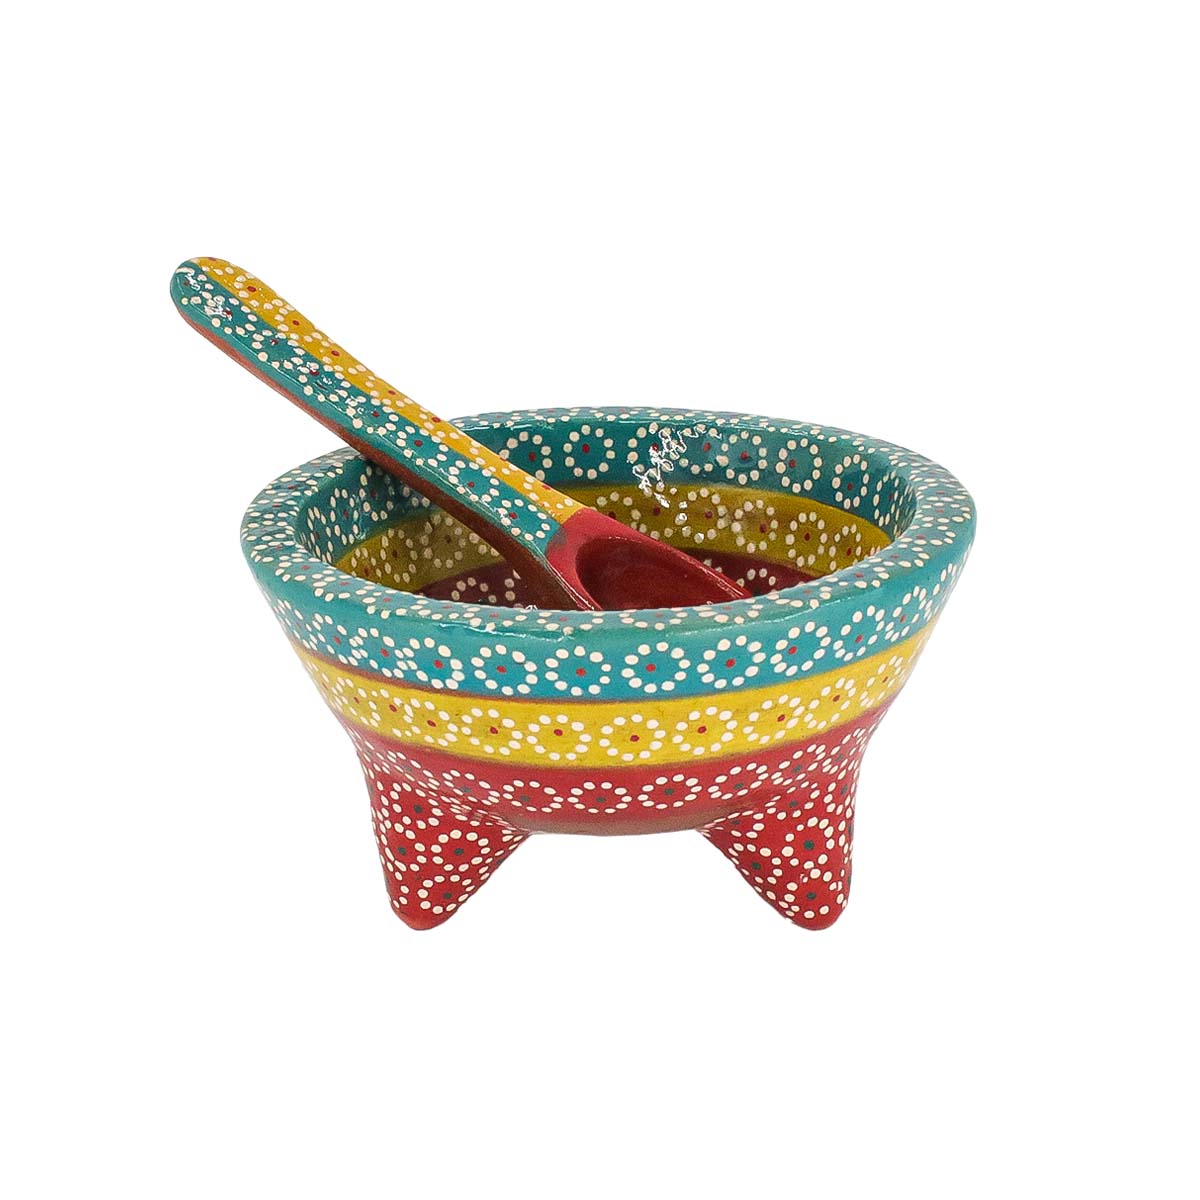 Capula Molcajete Clay Bowl and Matching Spoon - 6